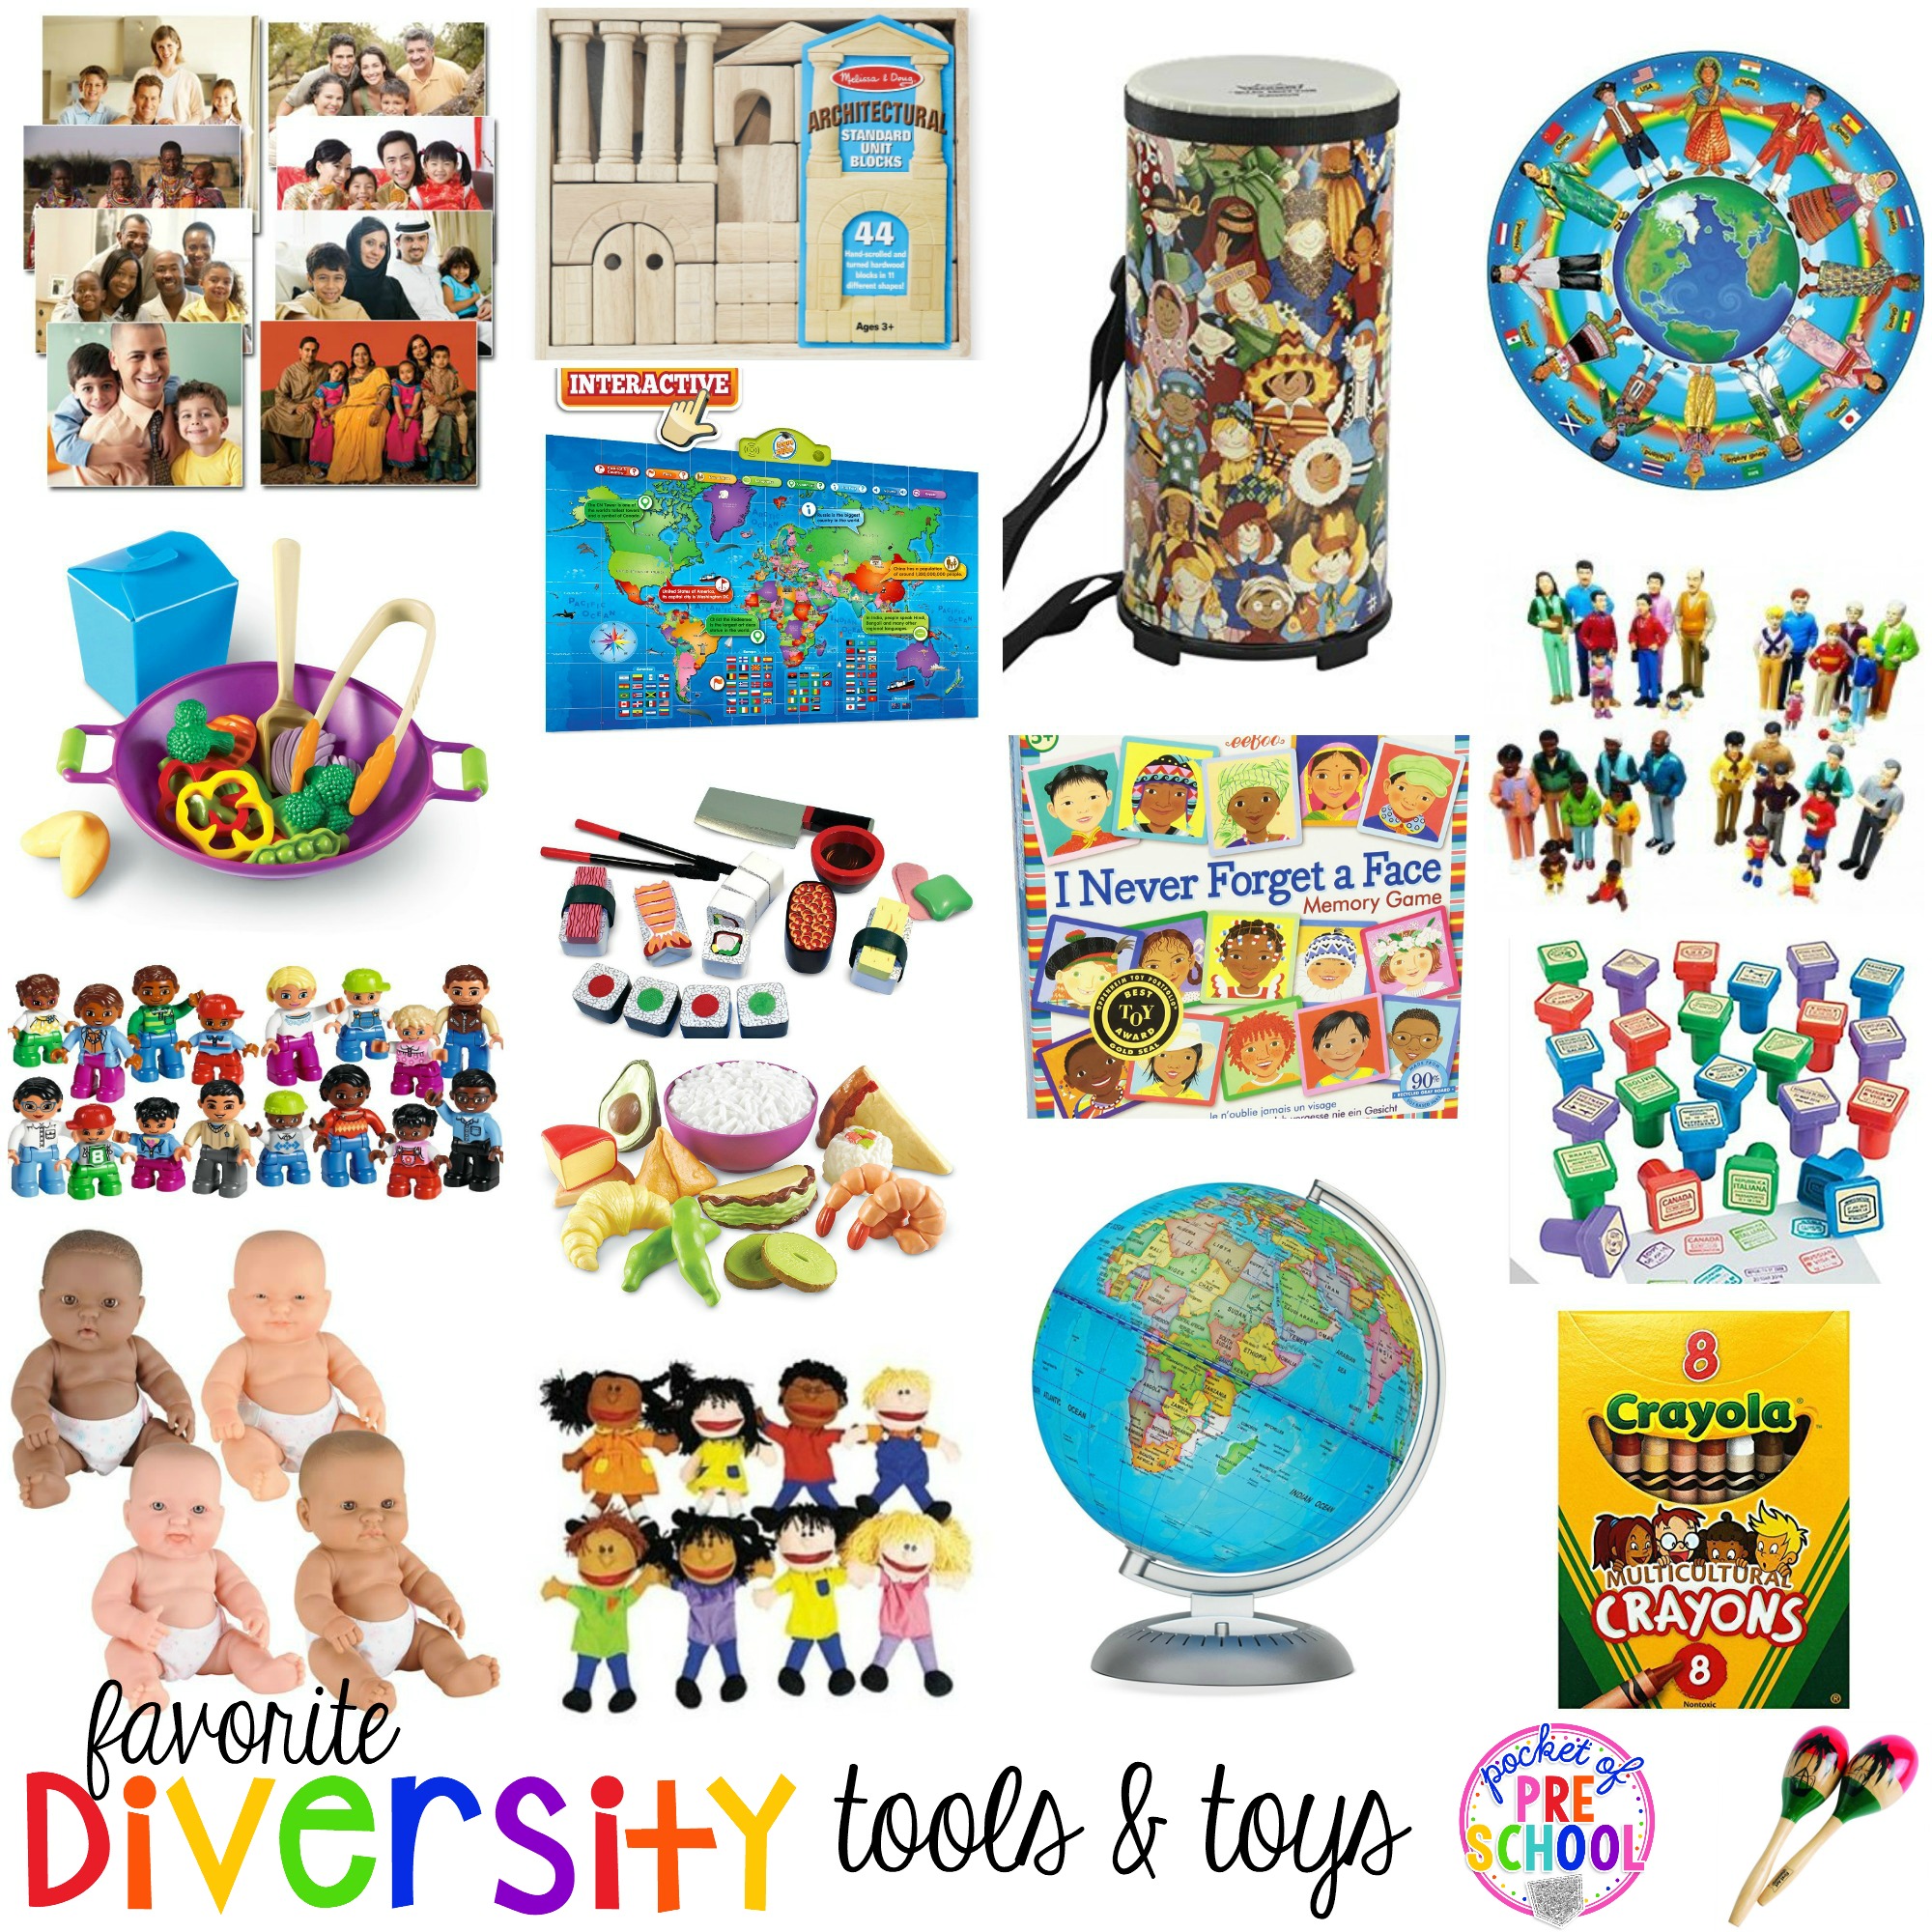 Diverse tools and toys for preschool, pre-k, and kindergarten. Be intentional when you select the items in your classroom. Celebrate the differences in each other because that's what makes every person amazing and unique!